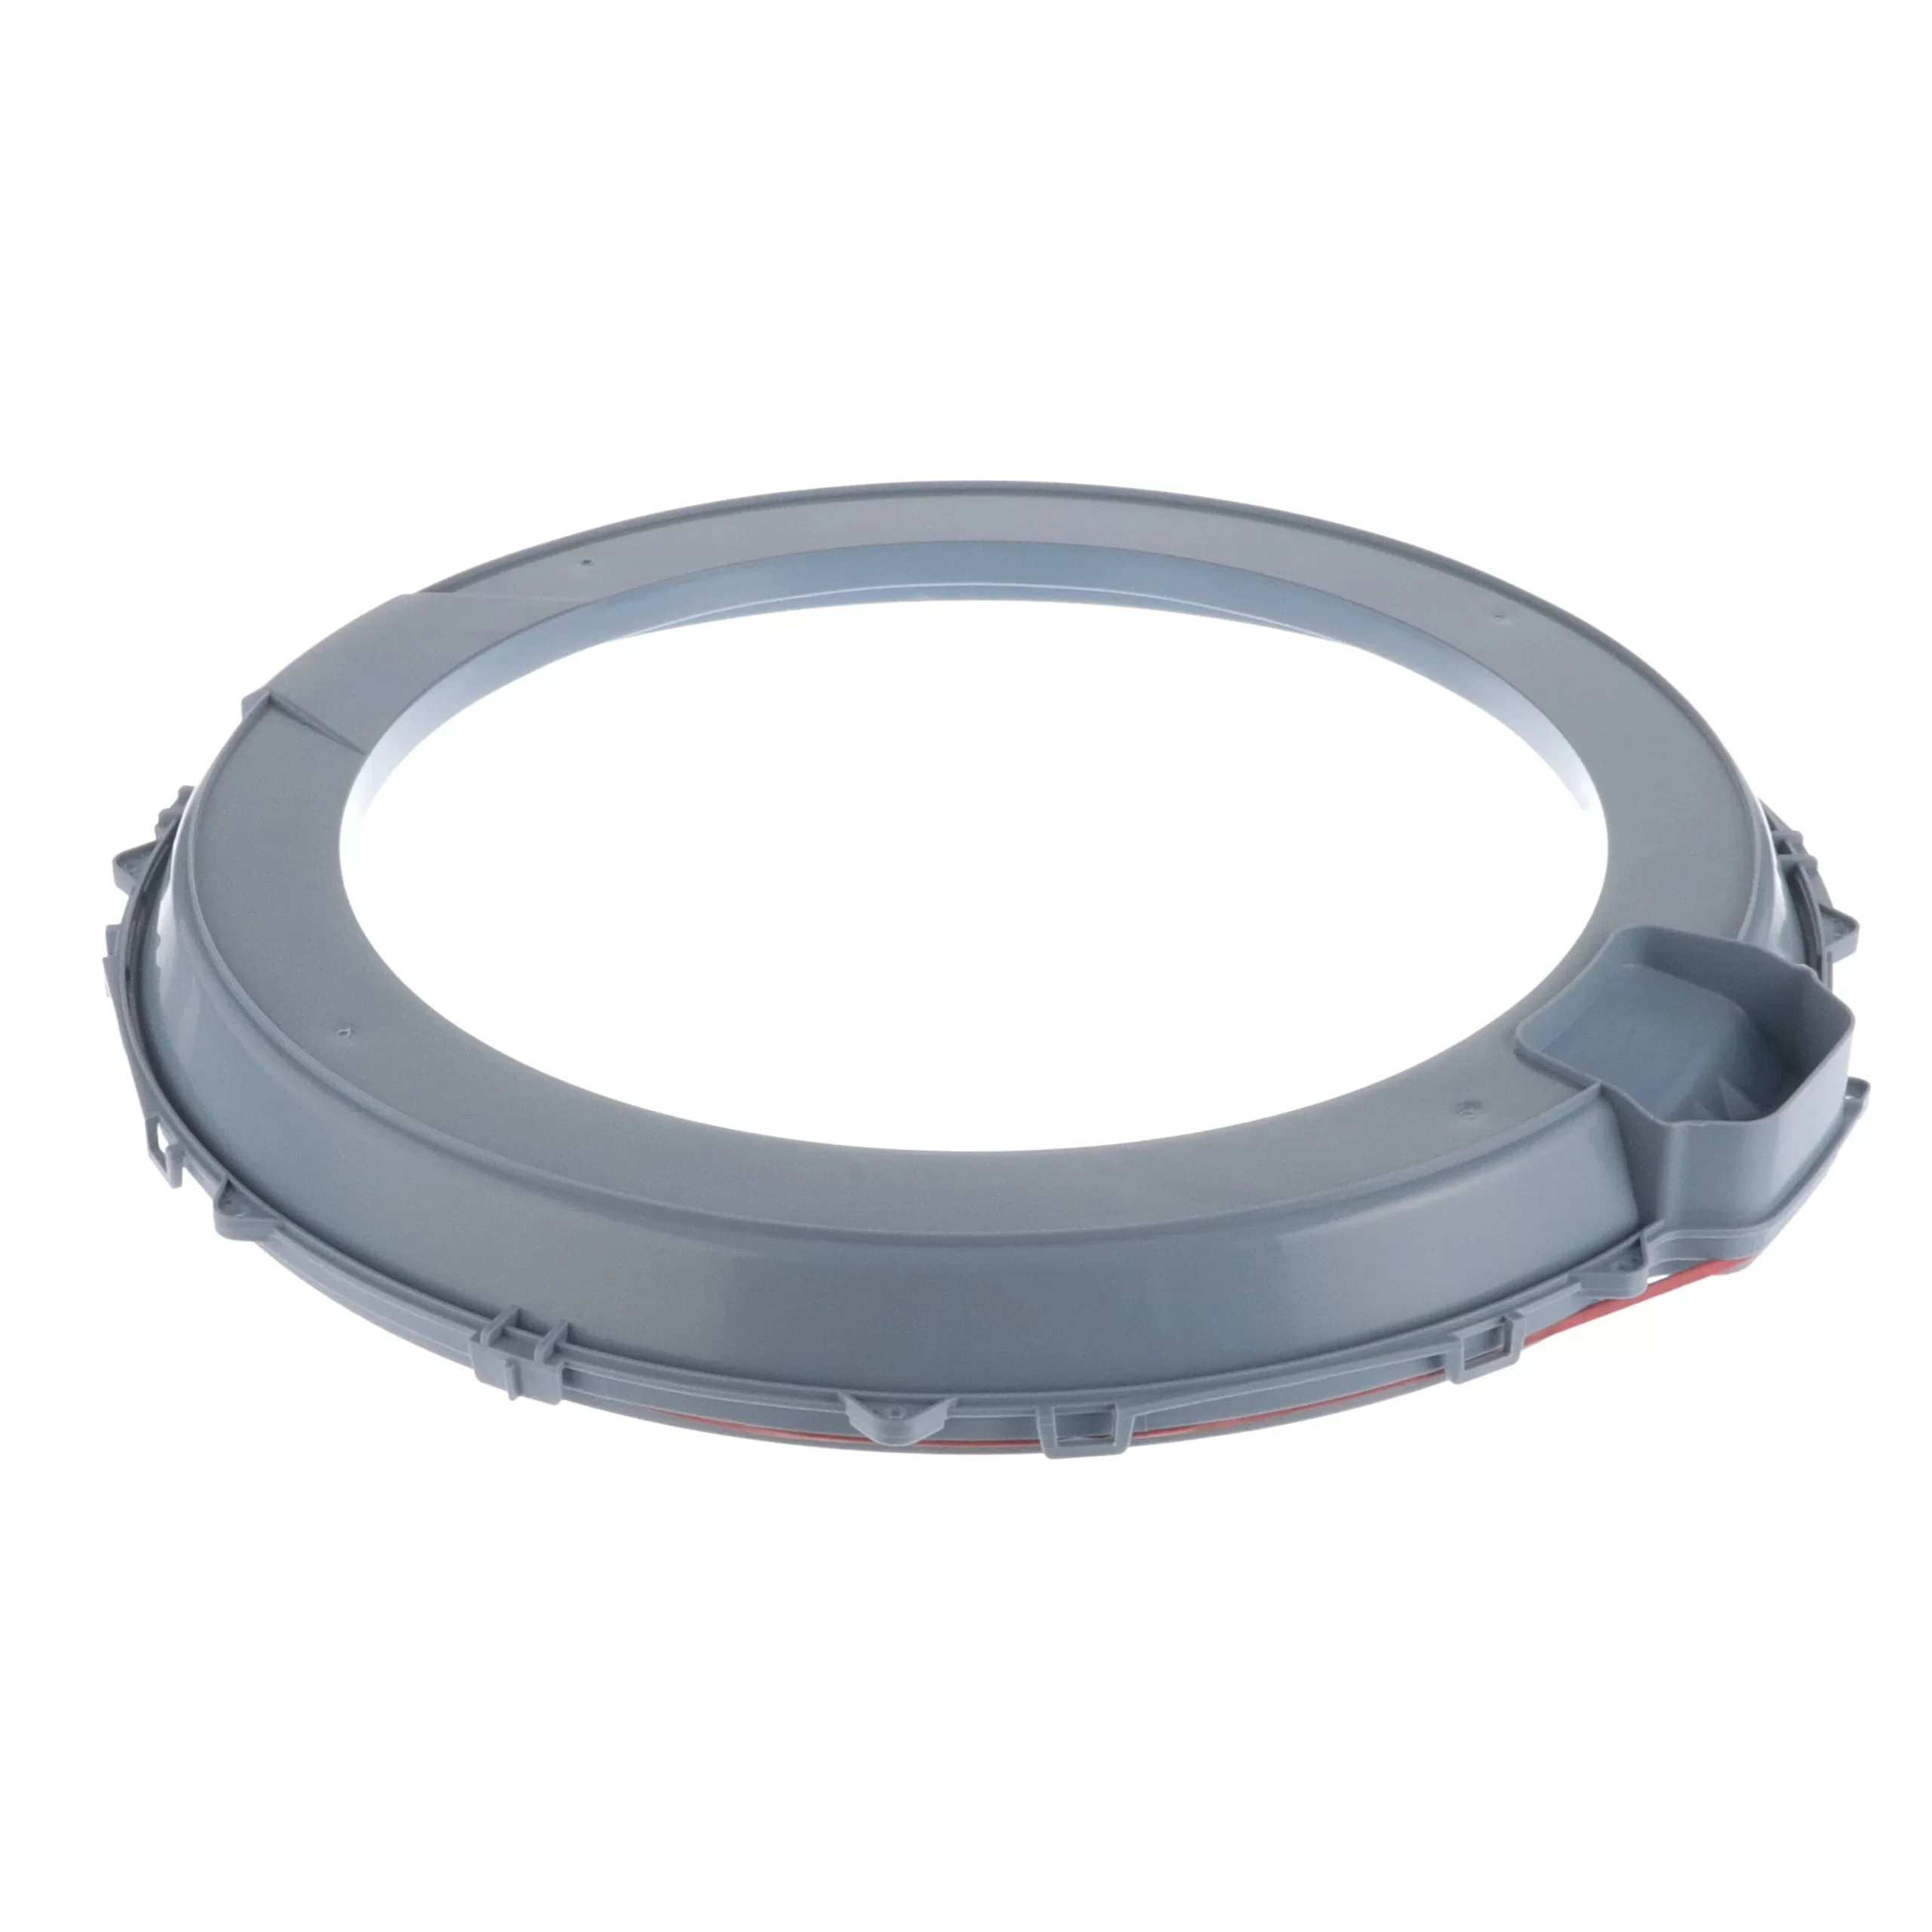 Samsung Washer Tub Cover Assembly. Part #DC97-16968A